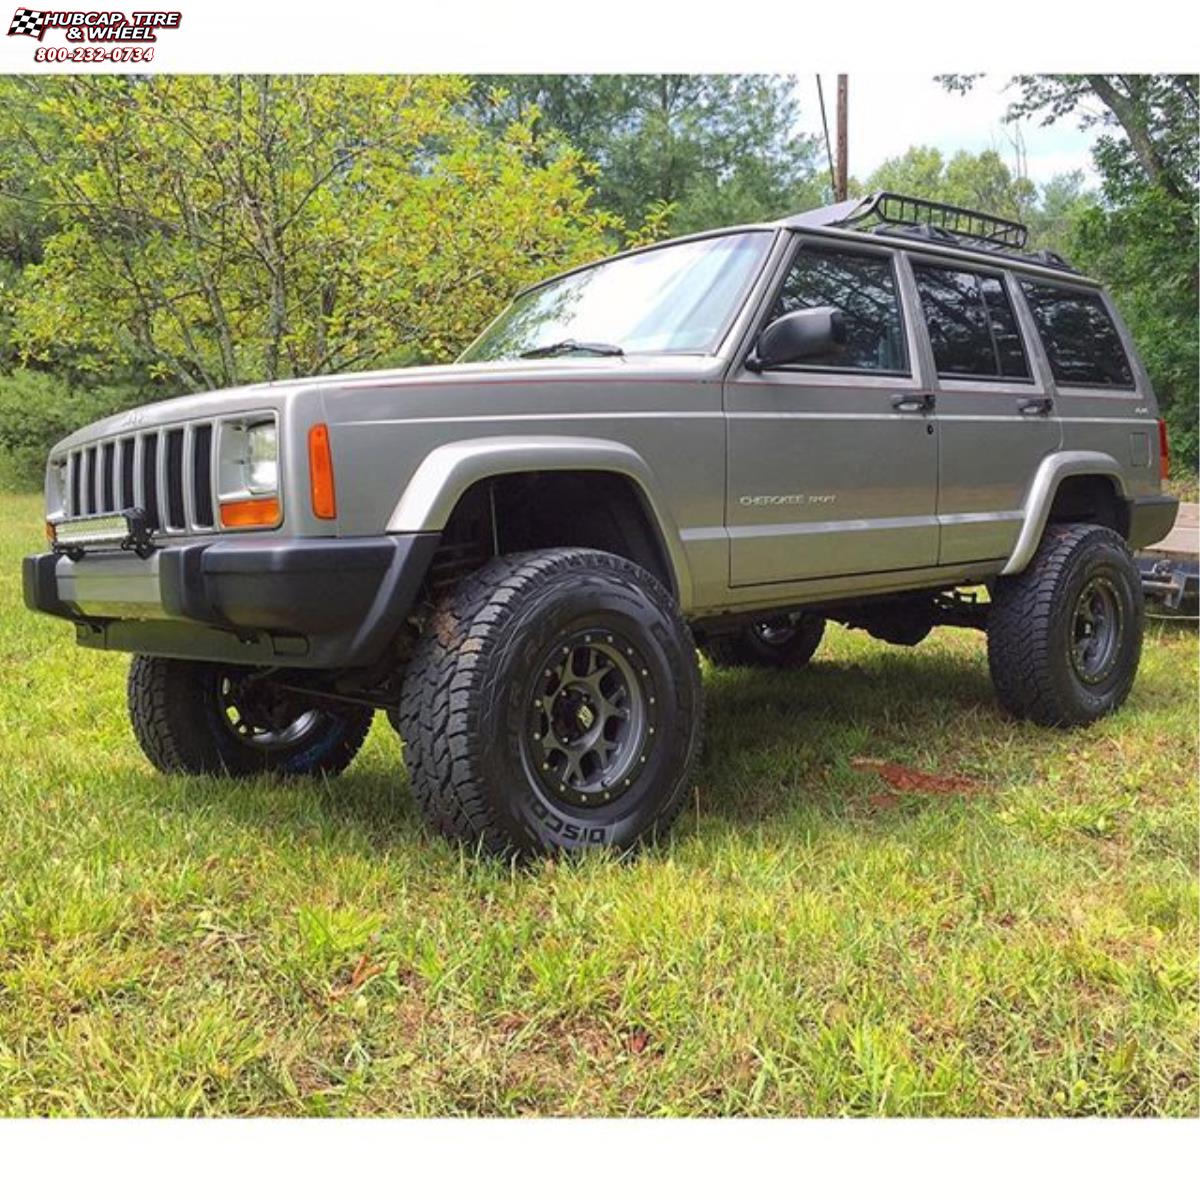 vehicle gallery/jeep cherokee xd series xd127 bully x  Matte Gray and Black Ring wheels and rims